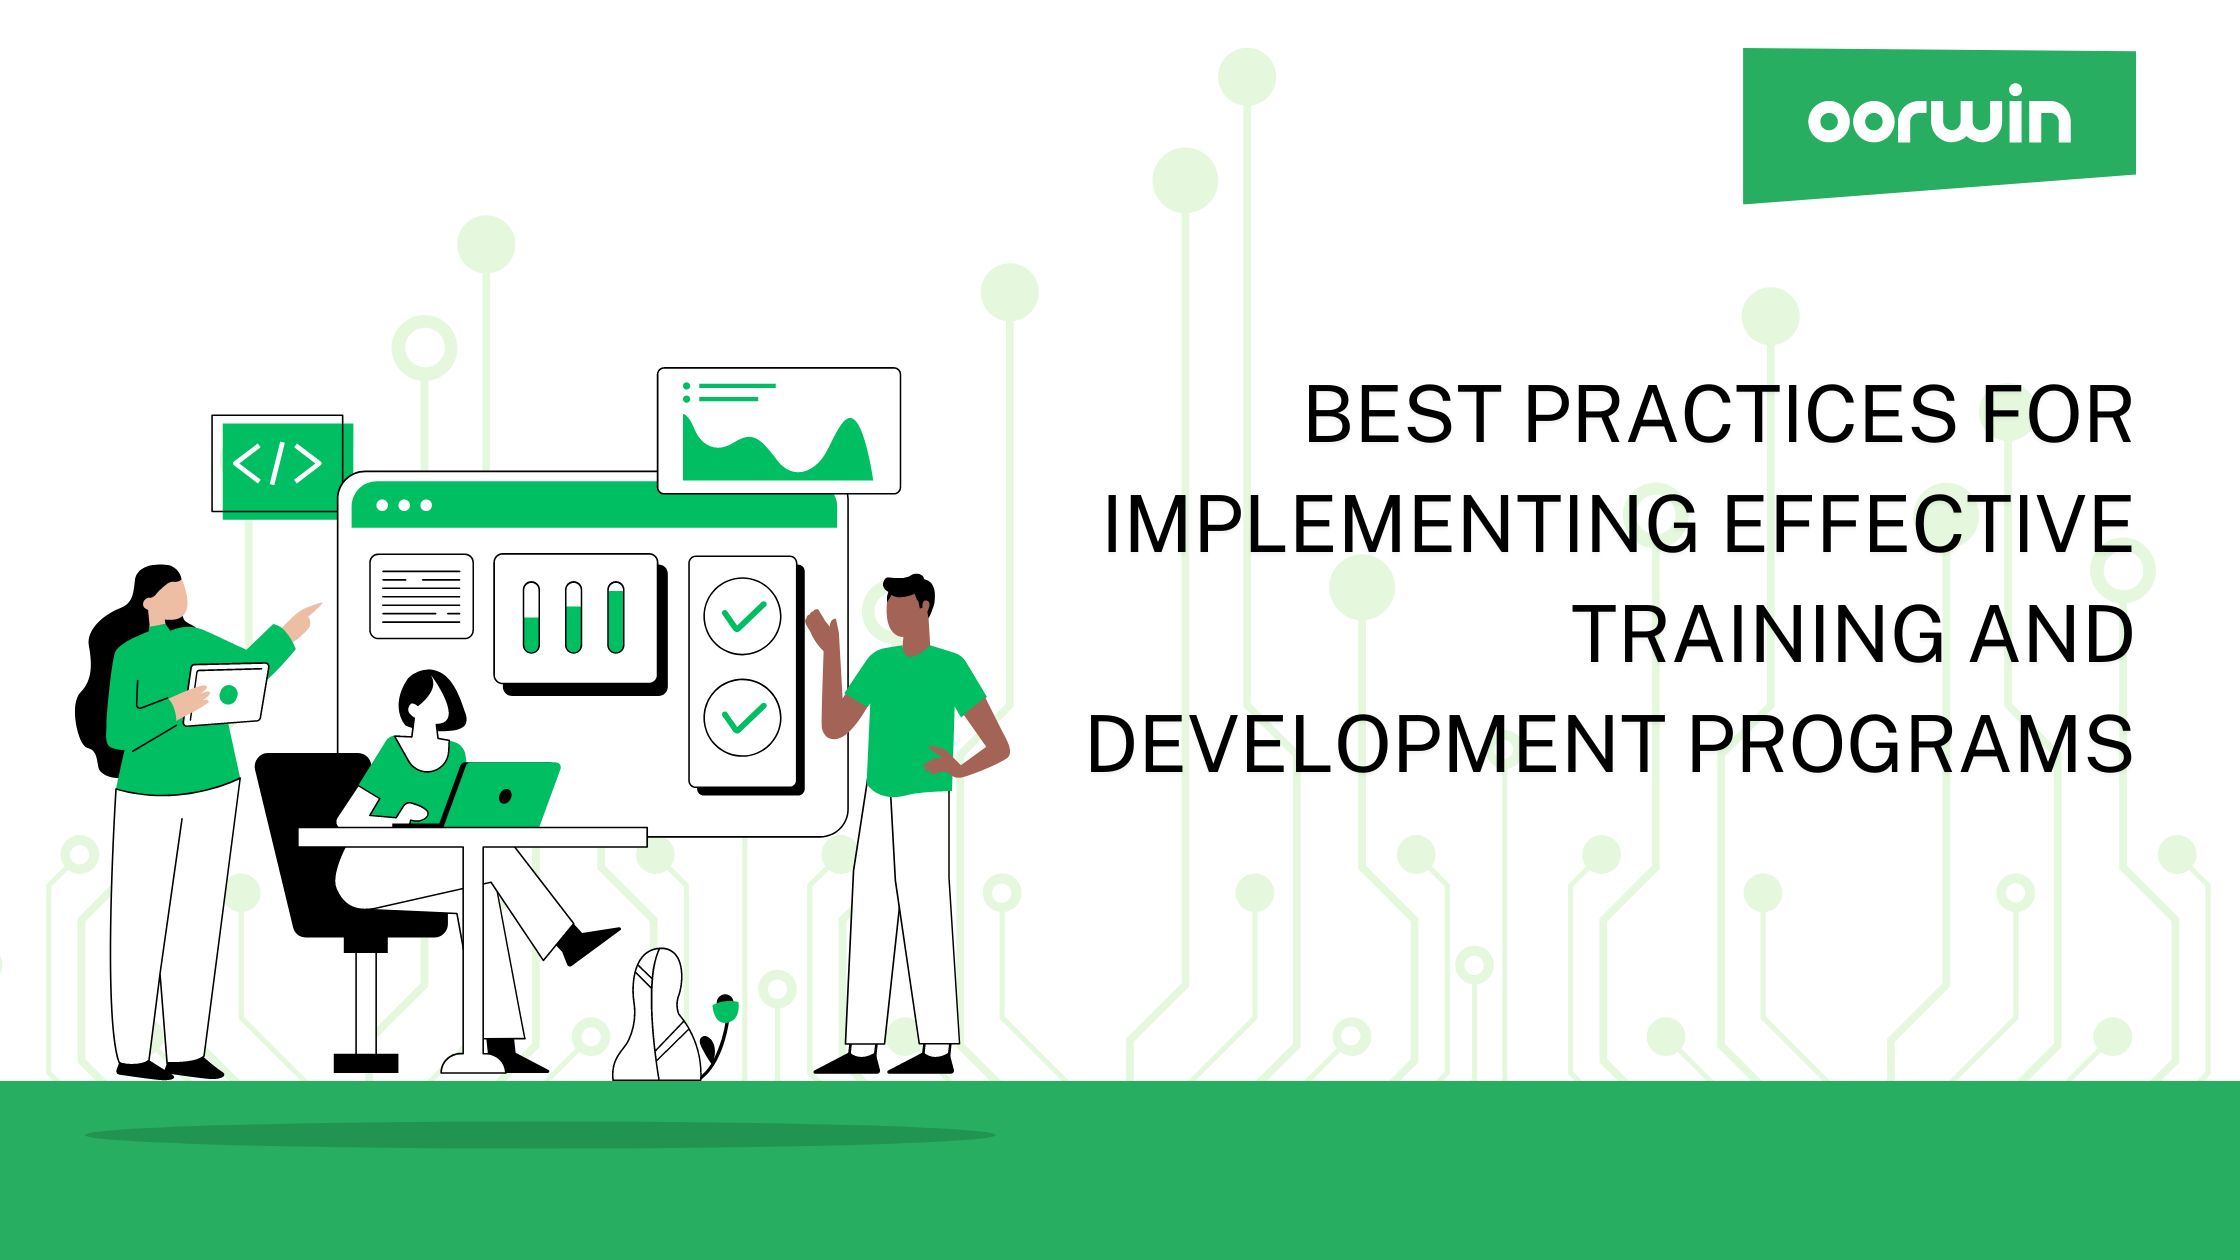 Best Practices for Developing An Effective Training and Development Program